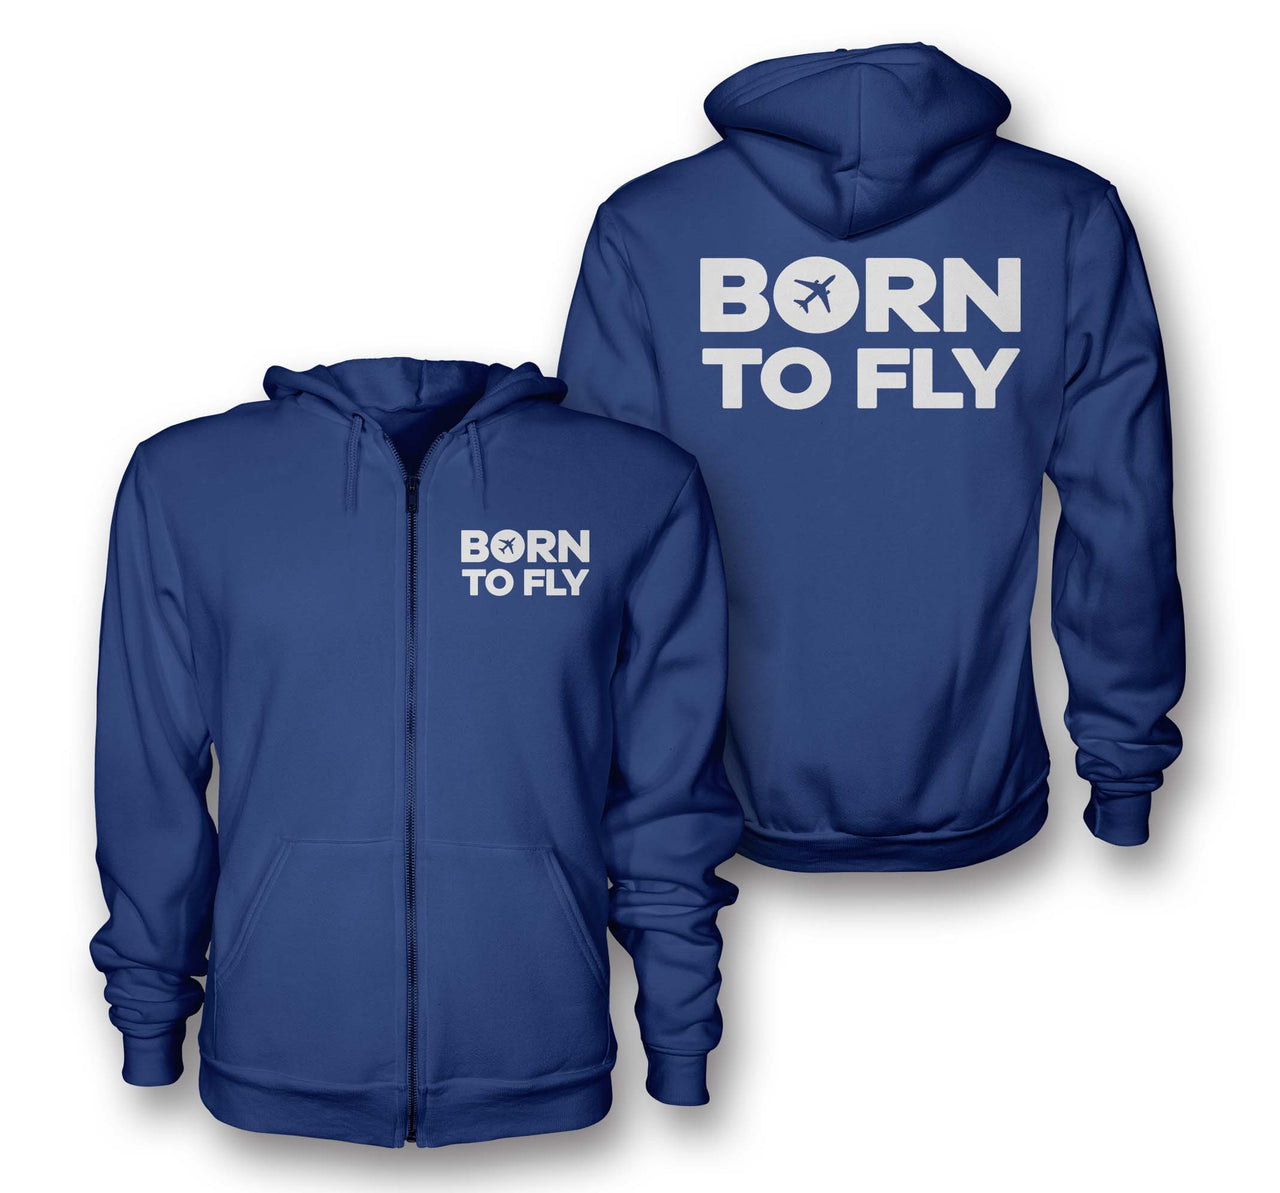 Born To Fly Special Designed Zipped Hoodies